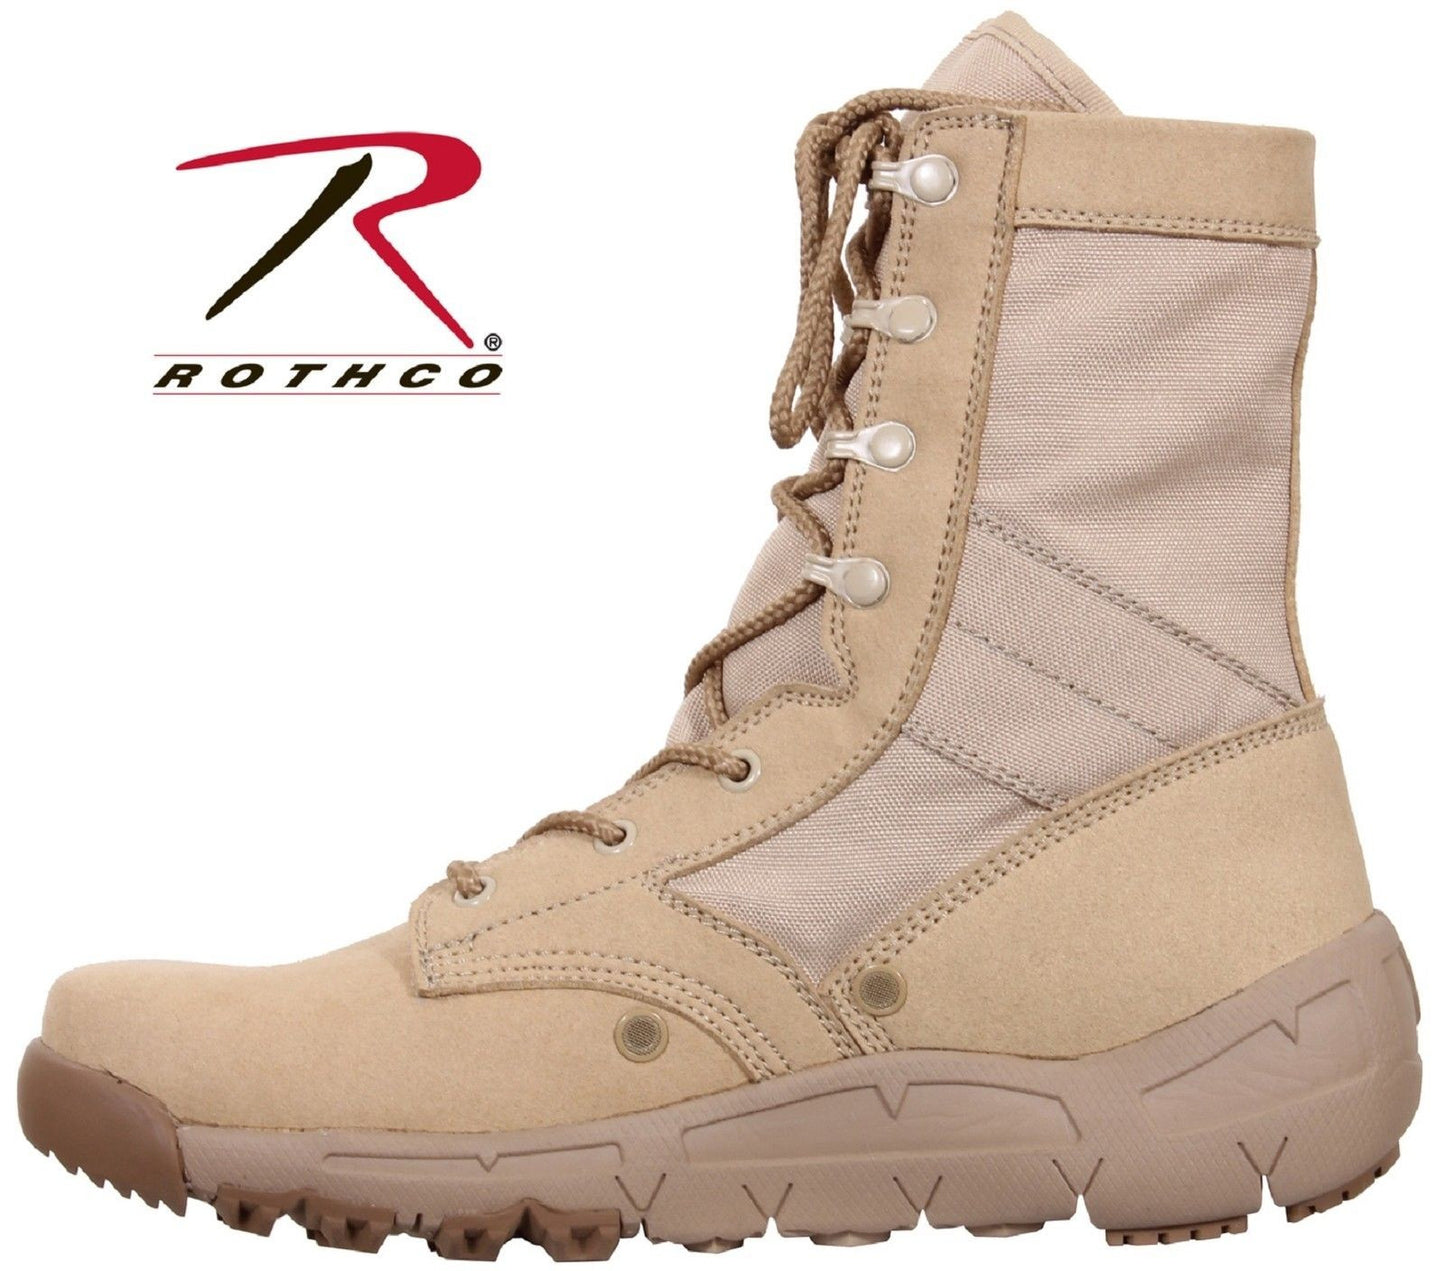 Lightweight V-Max Tactical Boots - Rothco Desert Tan 8.5" Field Duty Work Boot